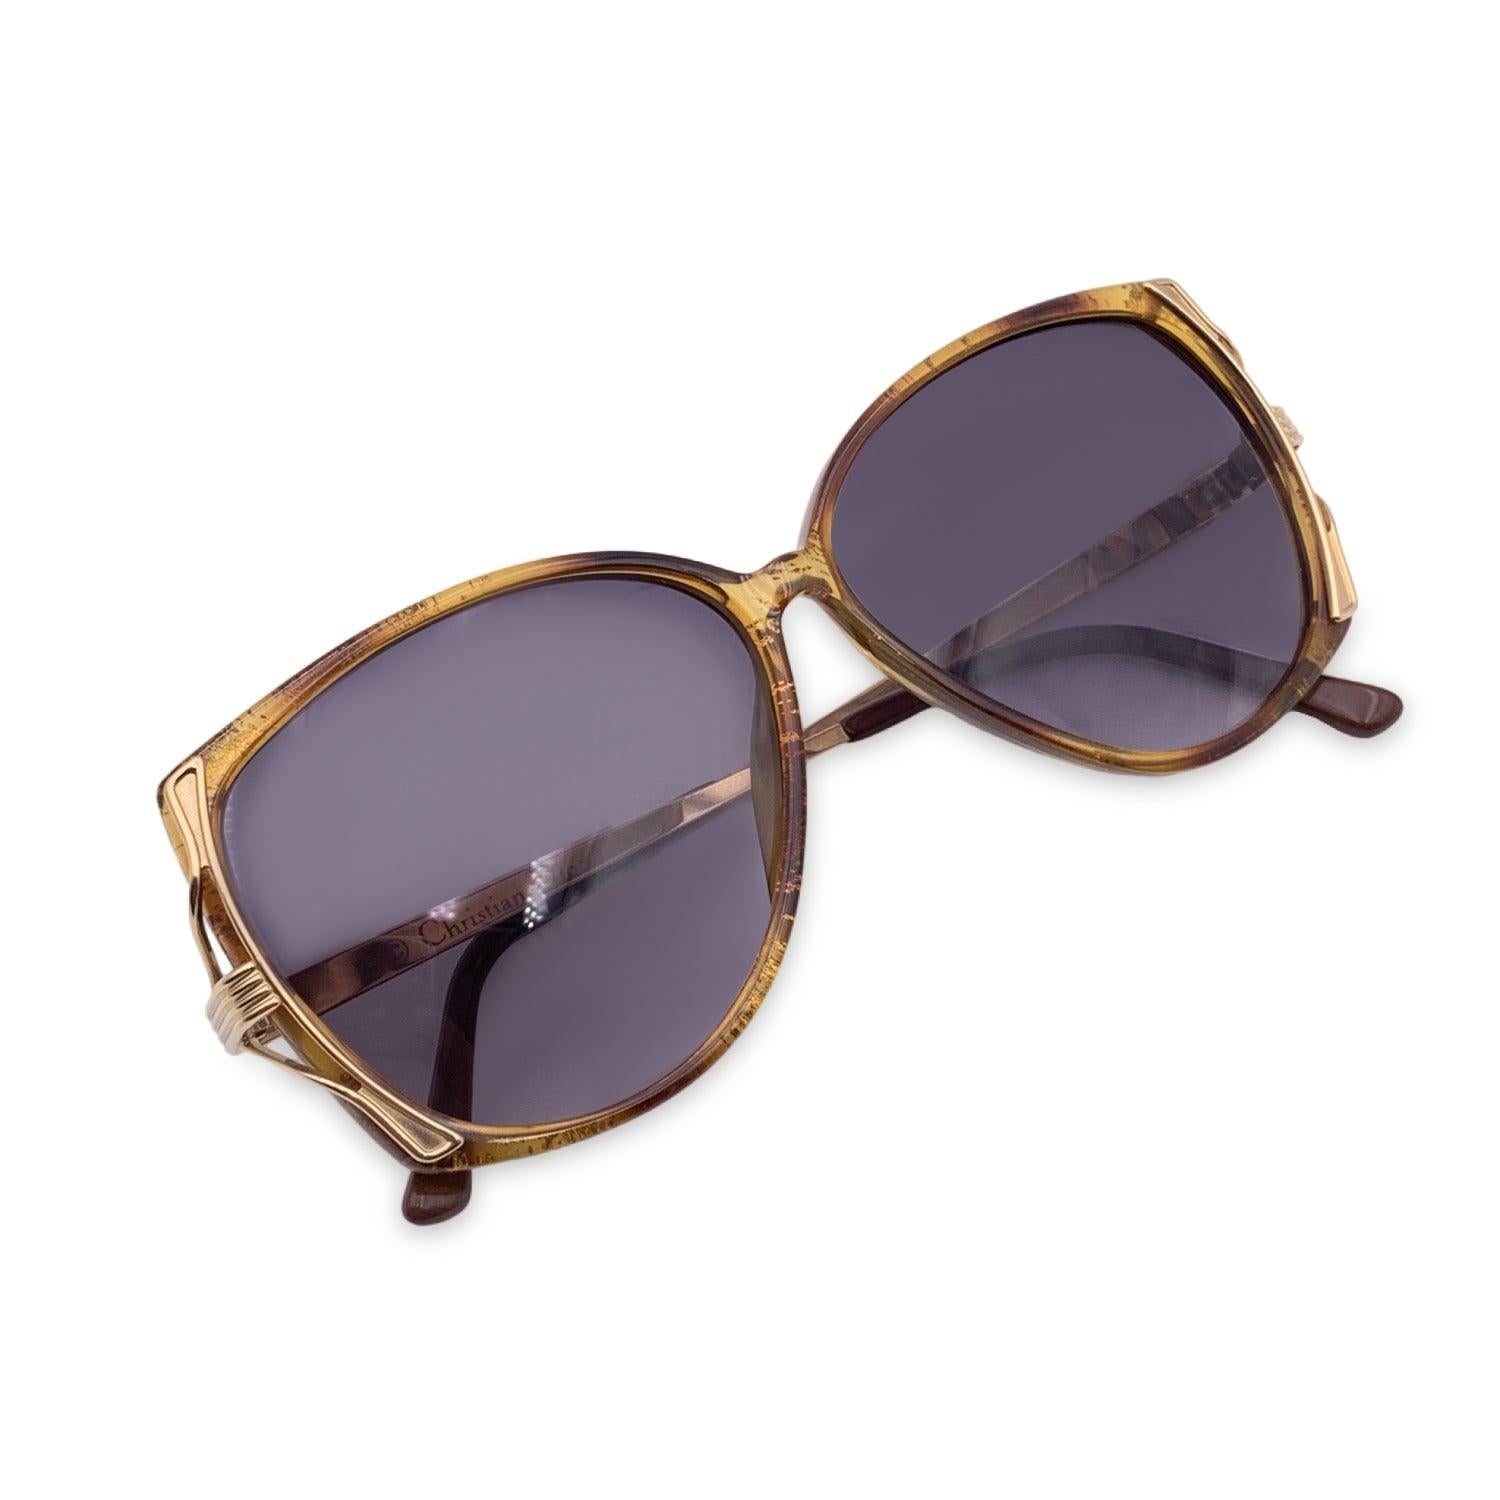 Vintage Christian Dior Unisex Sunglasses, Mod. 2529 11 Size 55/10 130mm. Brown, semi-transparent acetate frame and gold metal arms. 100% Total UVA/UVB protection blue gradient lenses. CD logos on the side of the temples. Details MATERIAL: Plastic